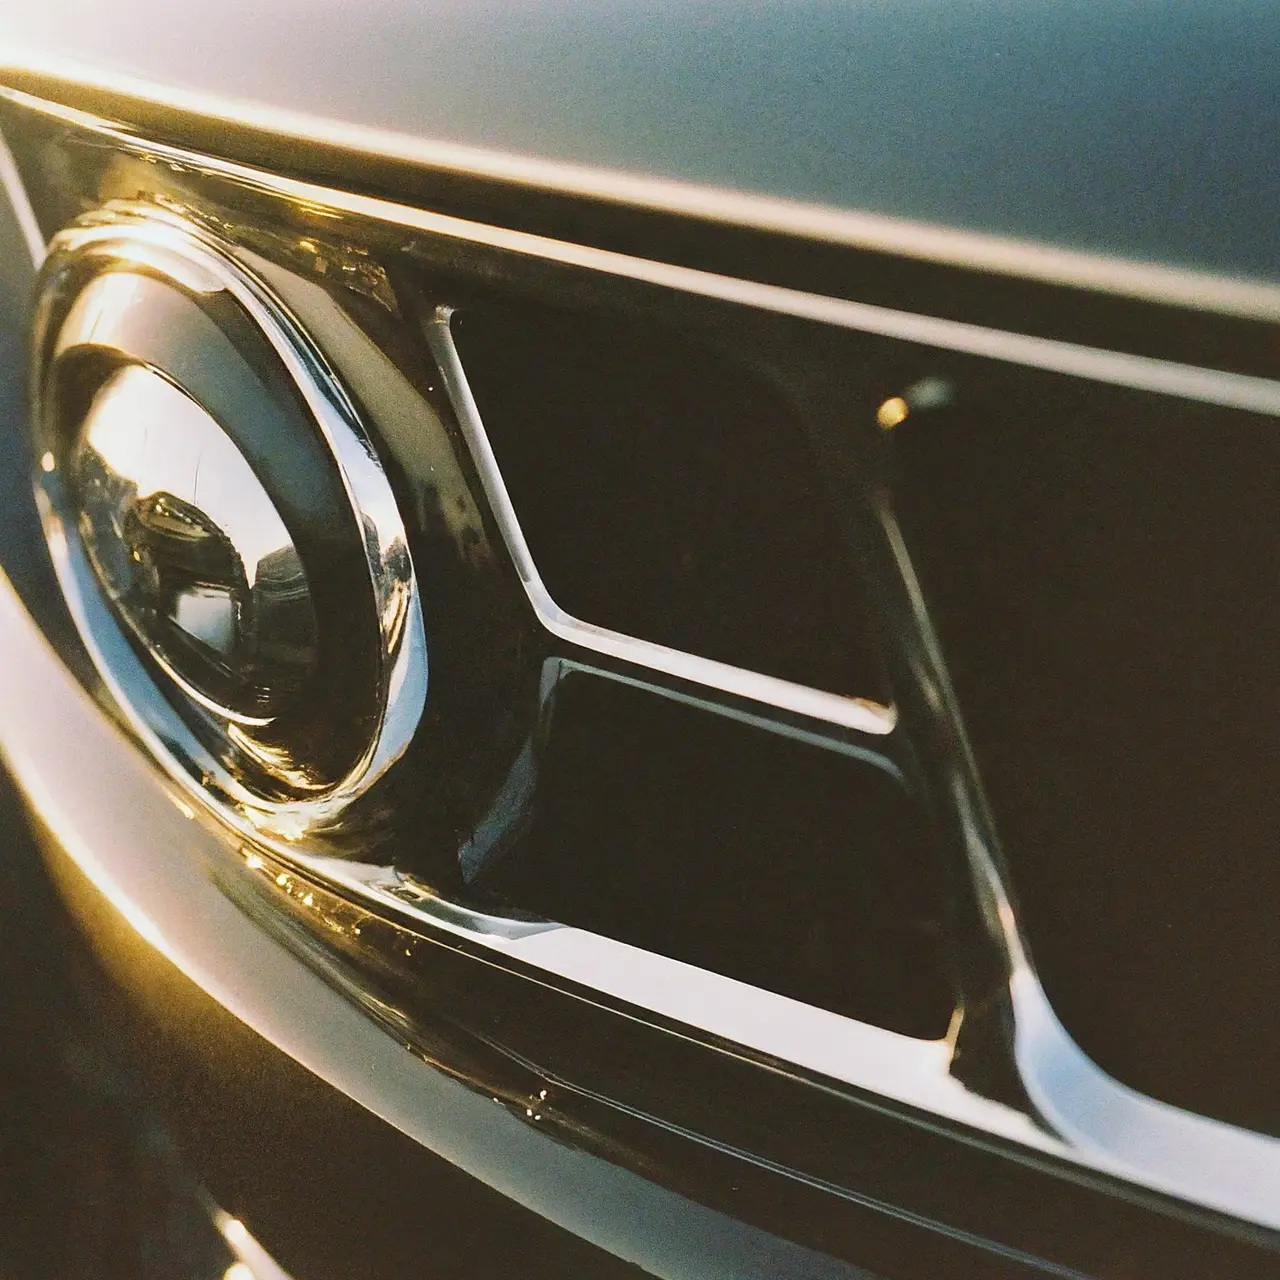 A shiny, detailed car gleaming under a bright sun. 35mm stock photo